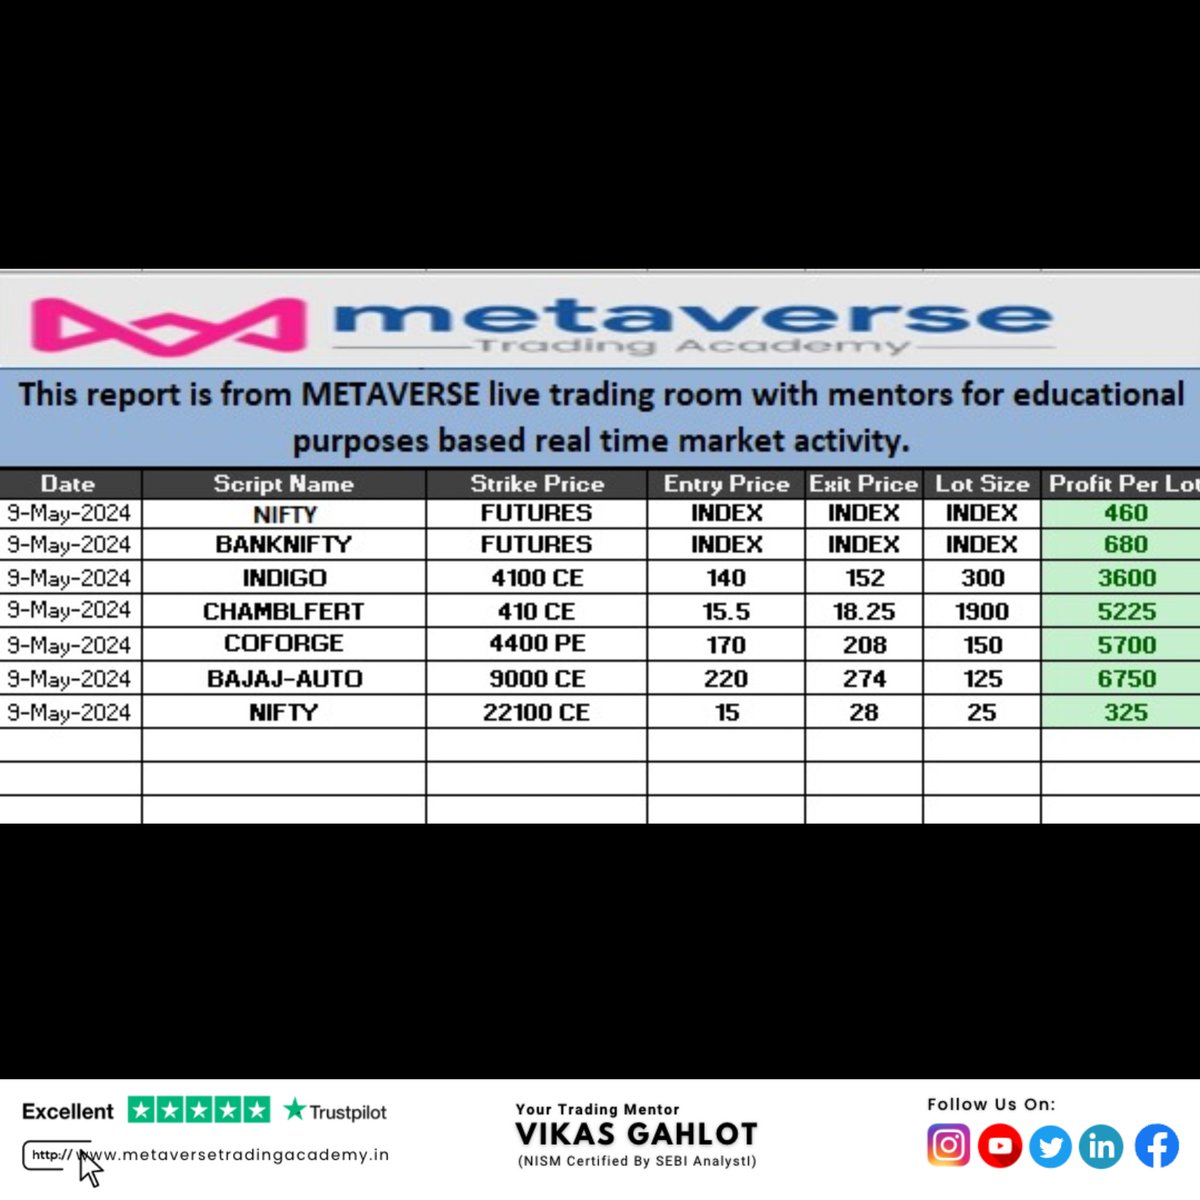 Join our Telegram channel
👉🏻 t.me/MetaverseTA
.
.
#trading #stockmarket #index #nifty #finnifty #banknifty #stocks #priceaction #candlestick #orderflow #optionchain
#marketprofile #missionlossrecovery